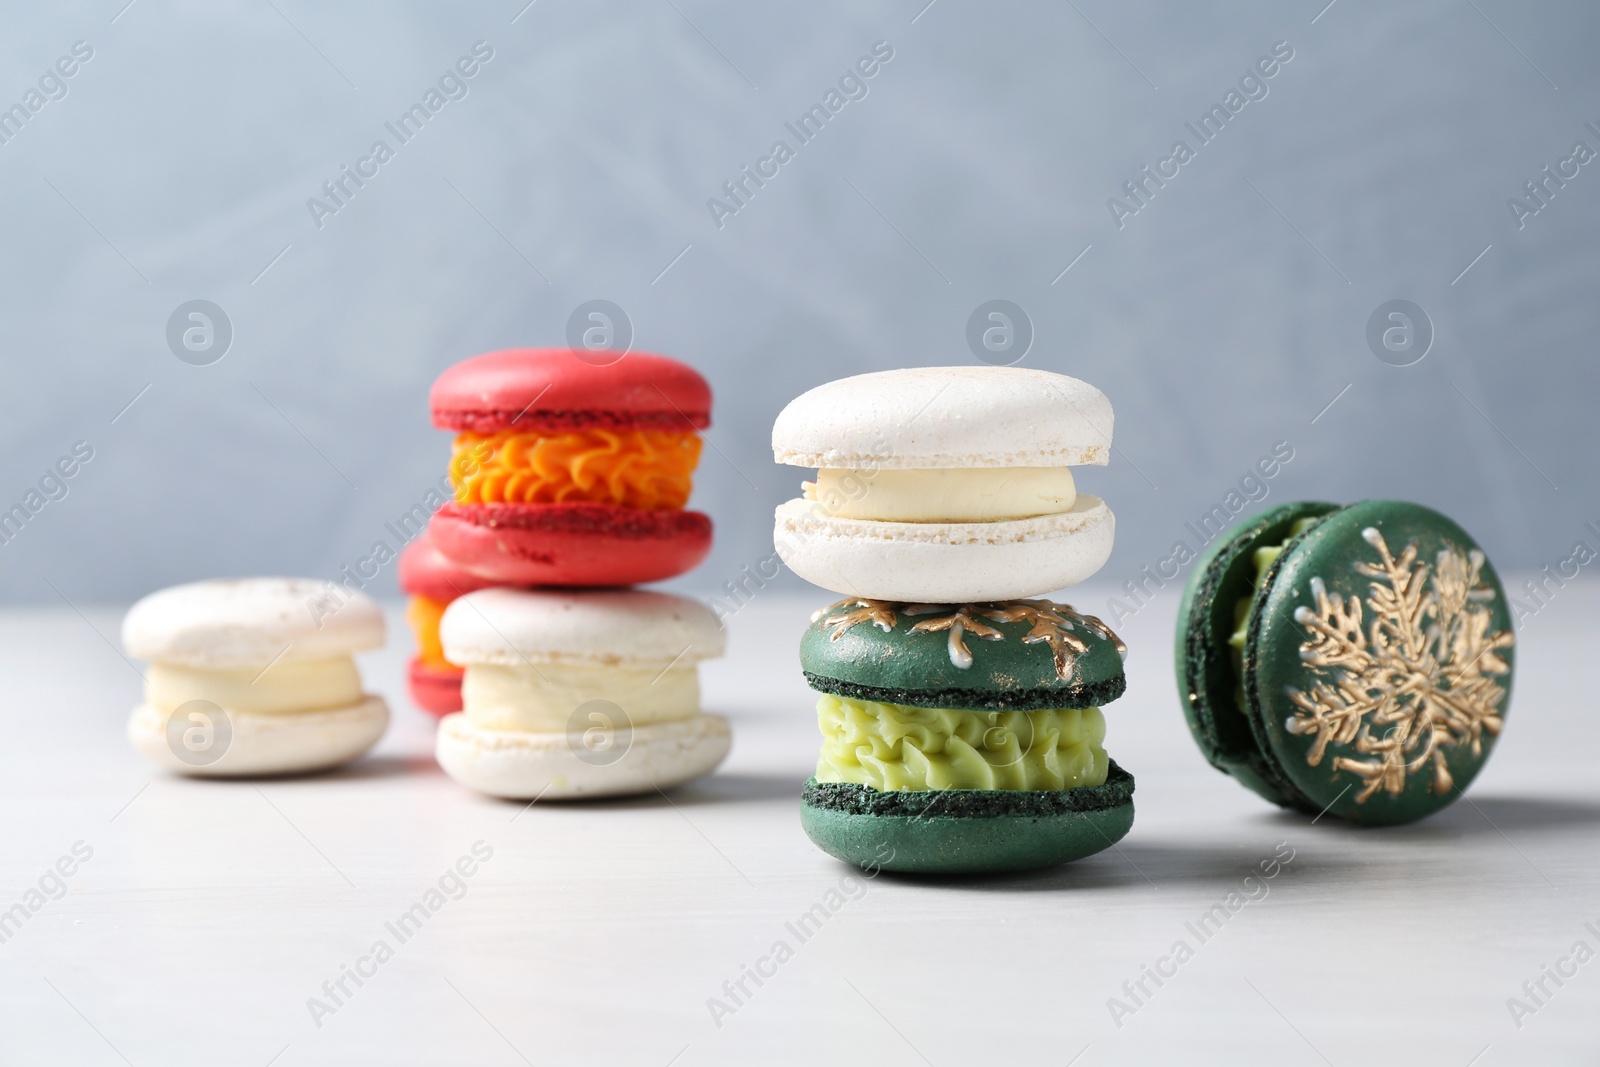 Photo of Different decorated Christmas macarons on white table, closeup